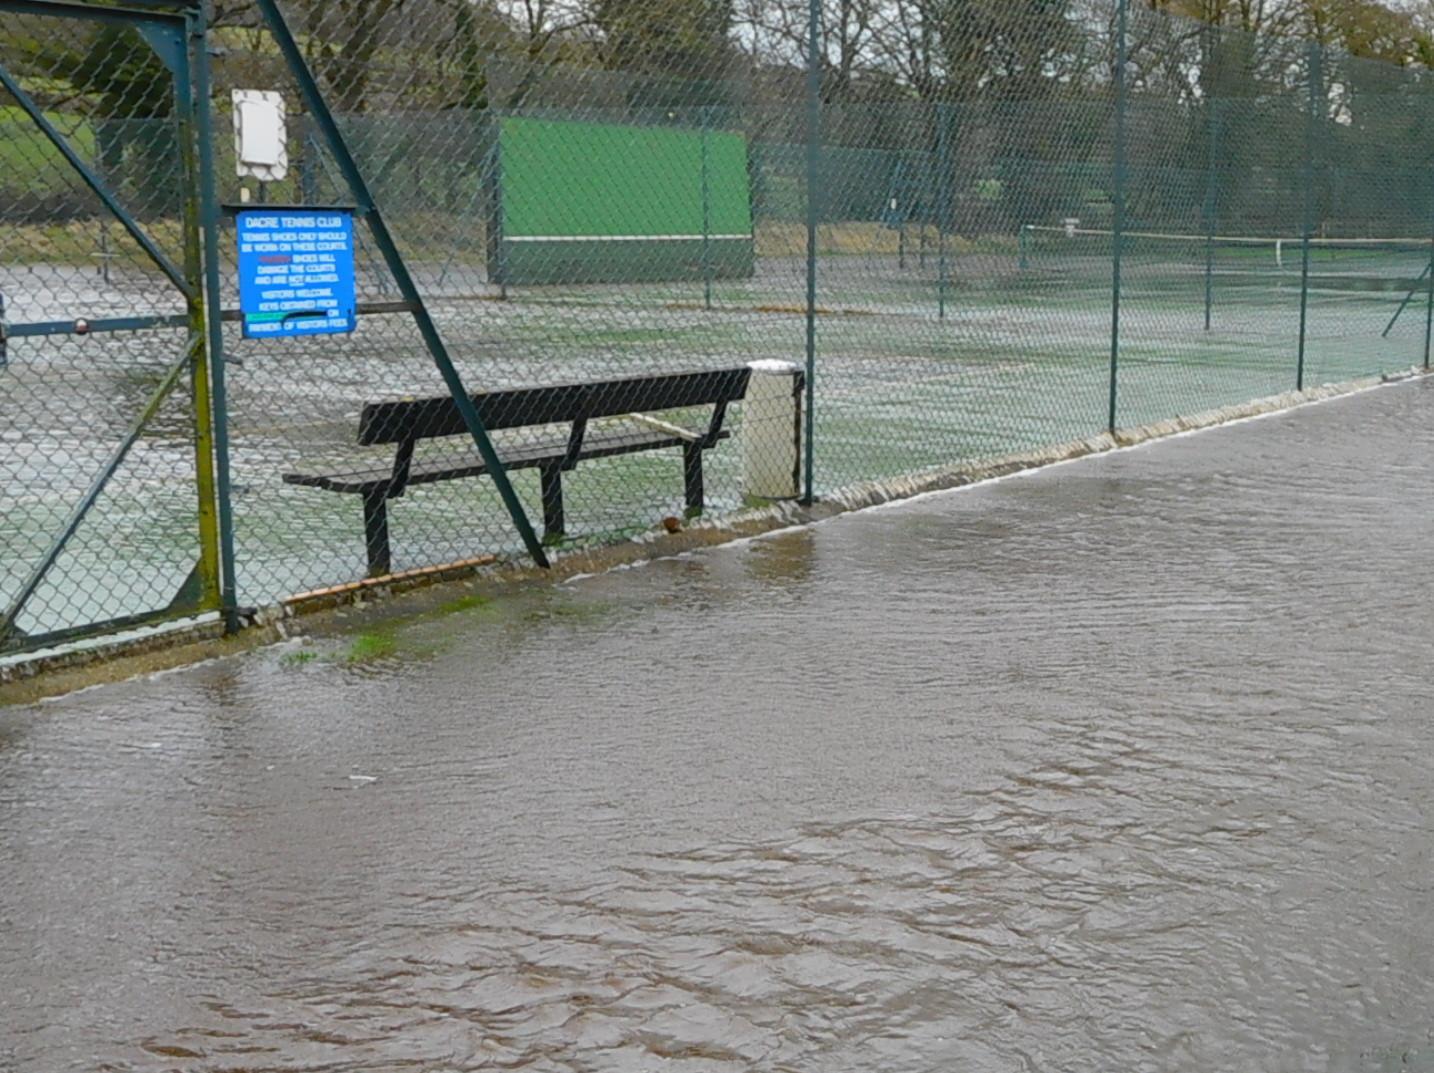 All tennis games were off at Dacre Banks yesterday.